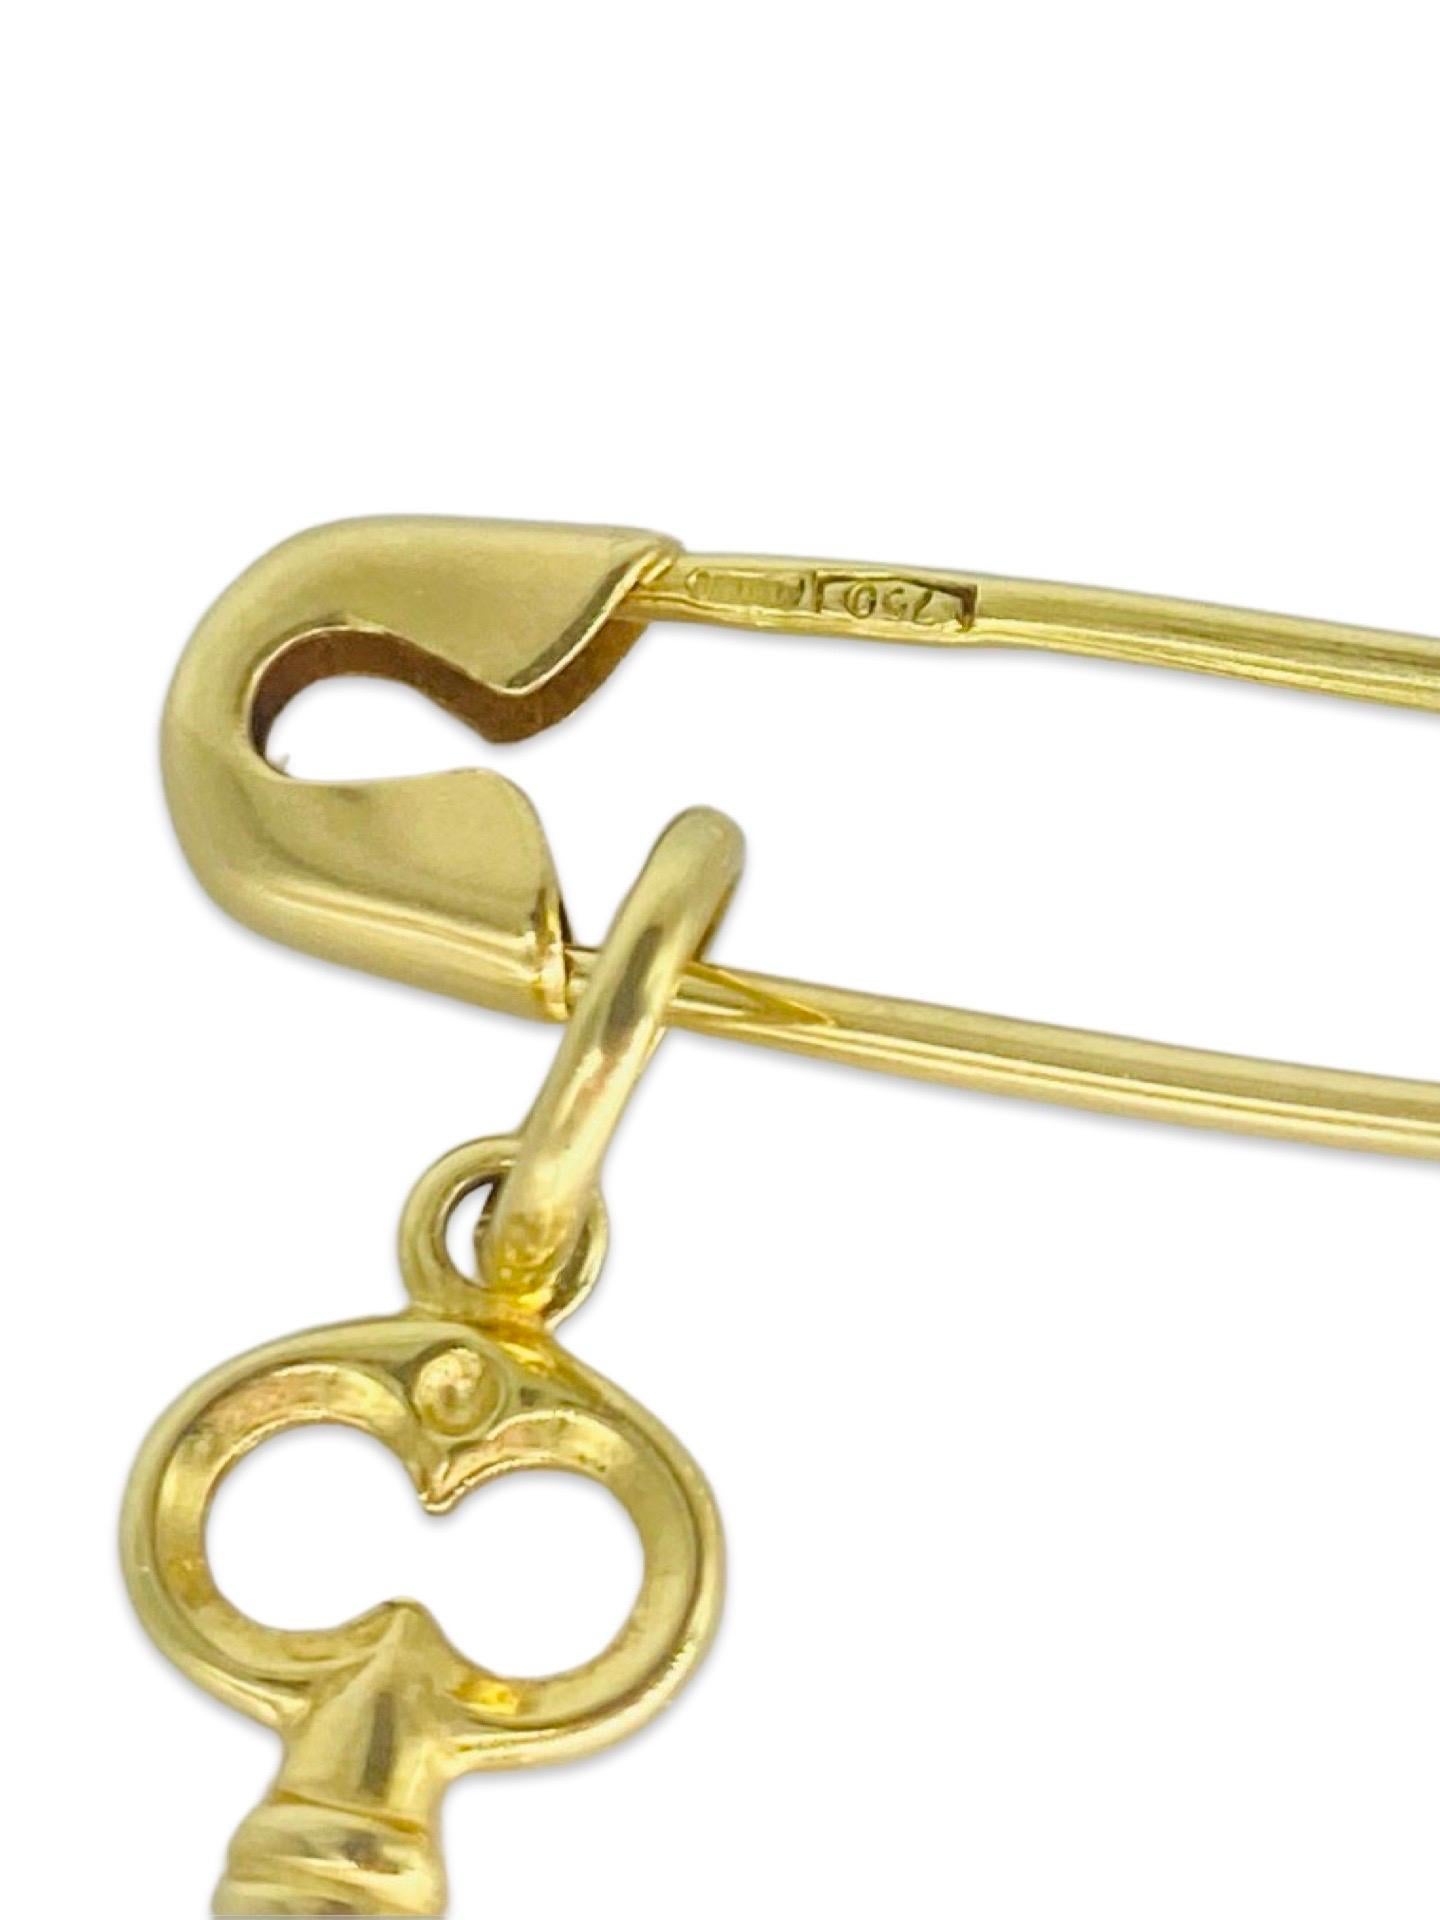 Women's or Men's Vintage Safety Key Pin 18k Gold Italy For Sale